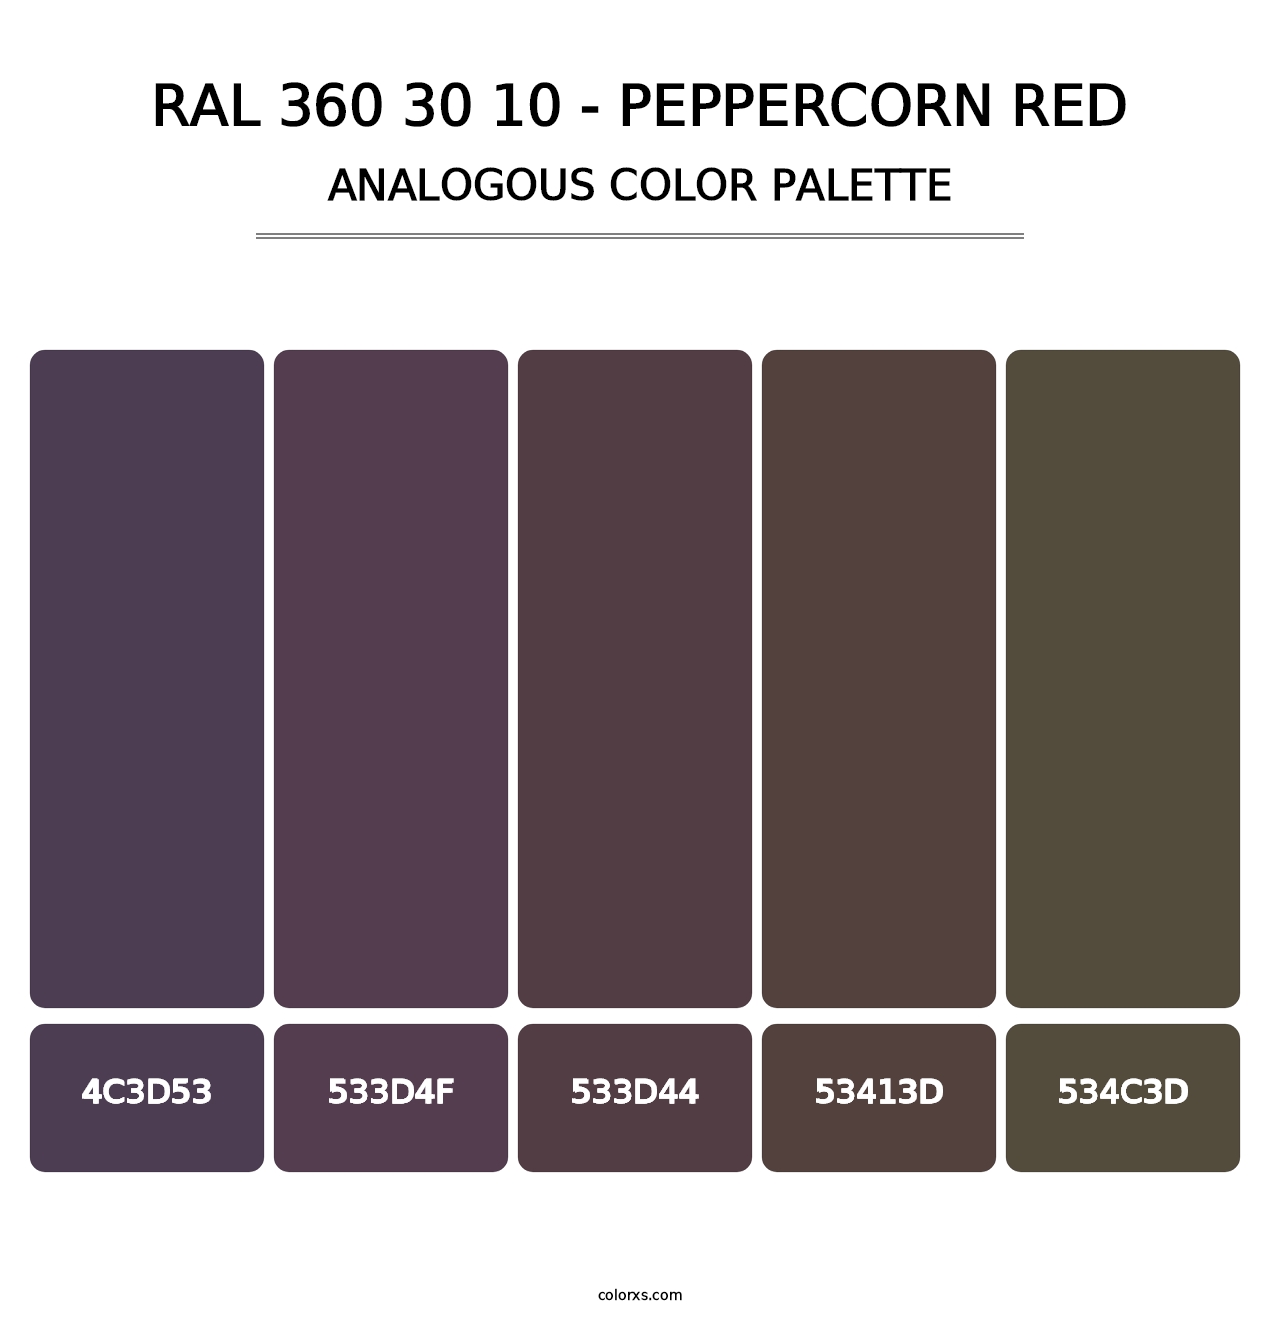 RAL 360 30 10 - Peppercorn Red - Analogous Color Palette